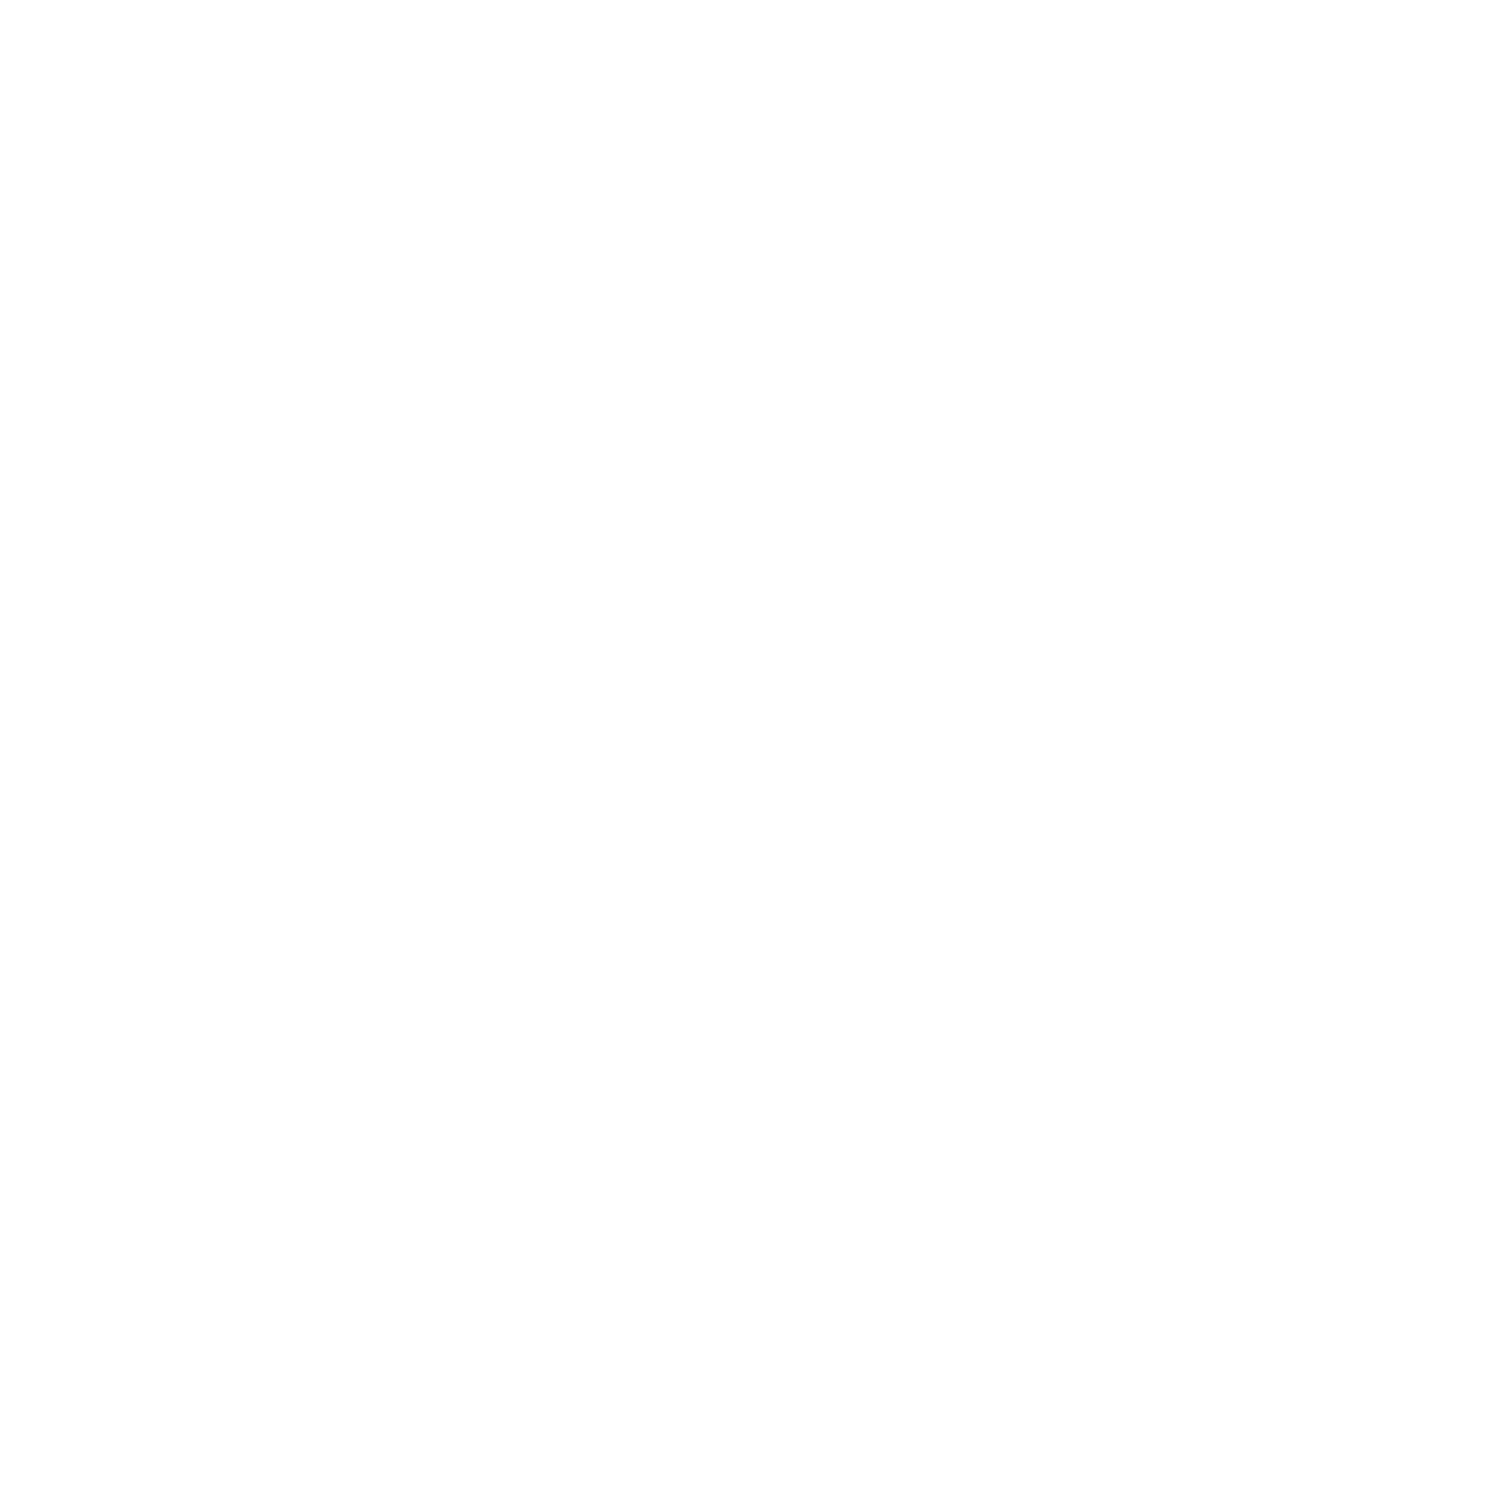 The Bluejay House